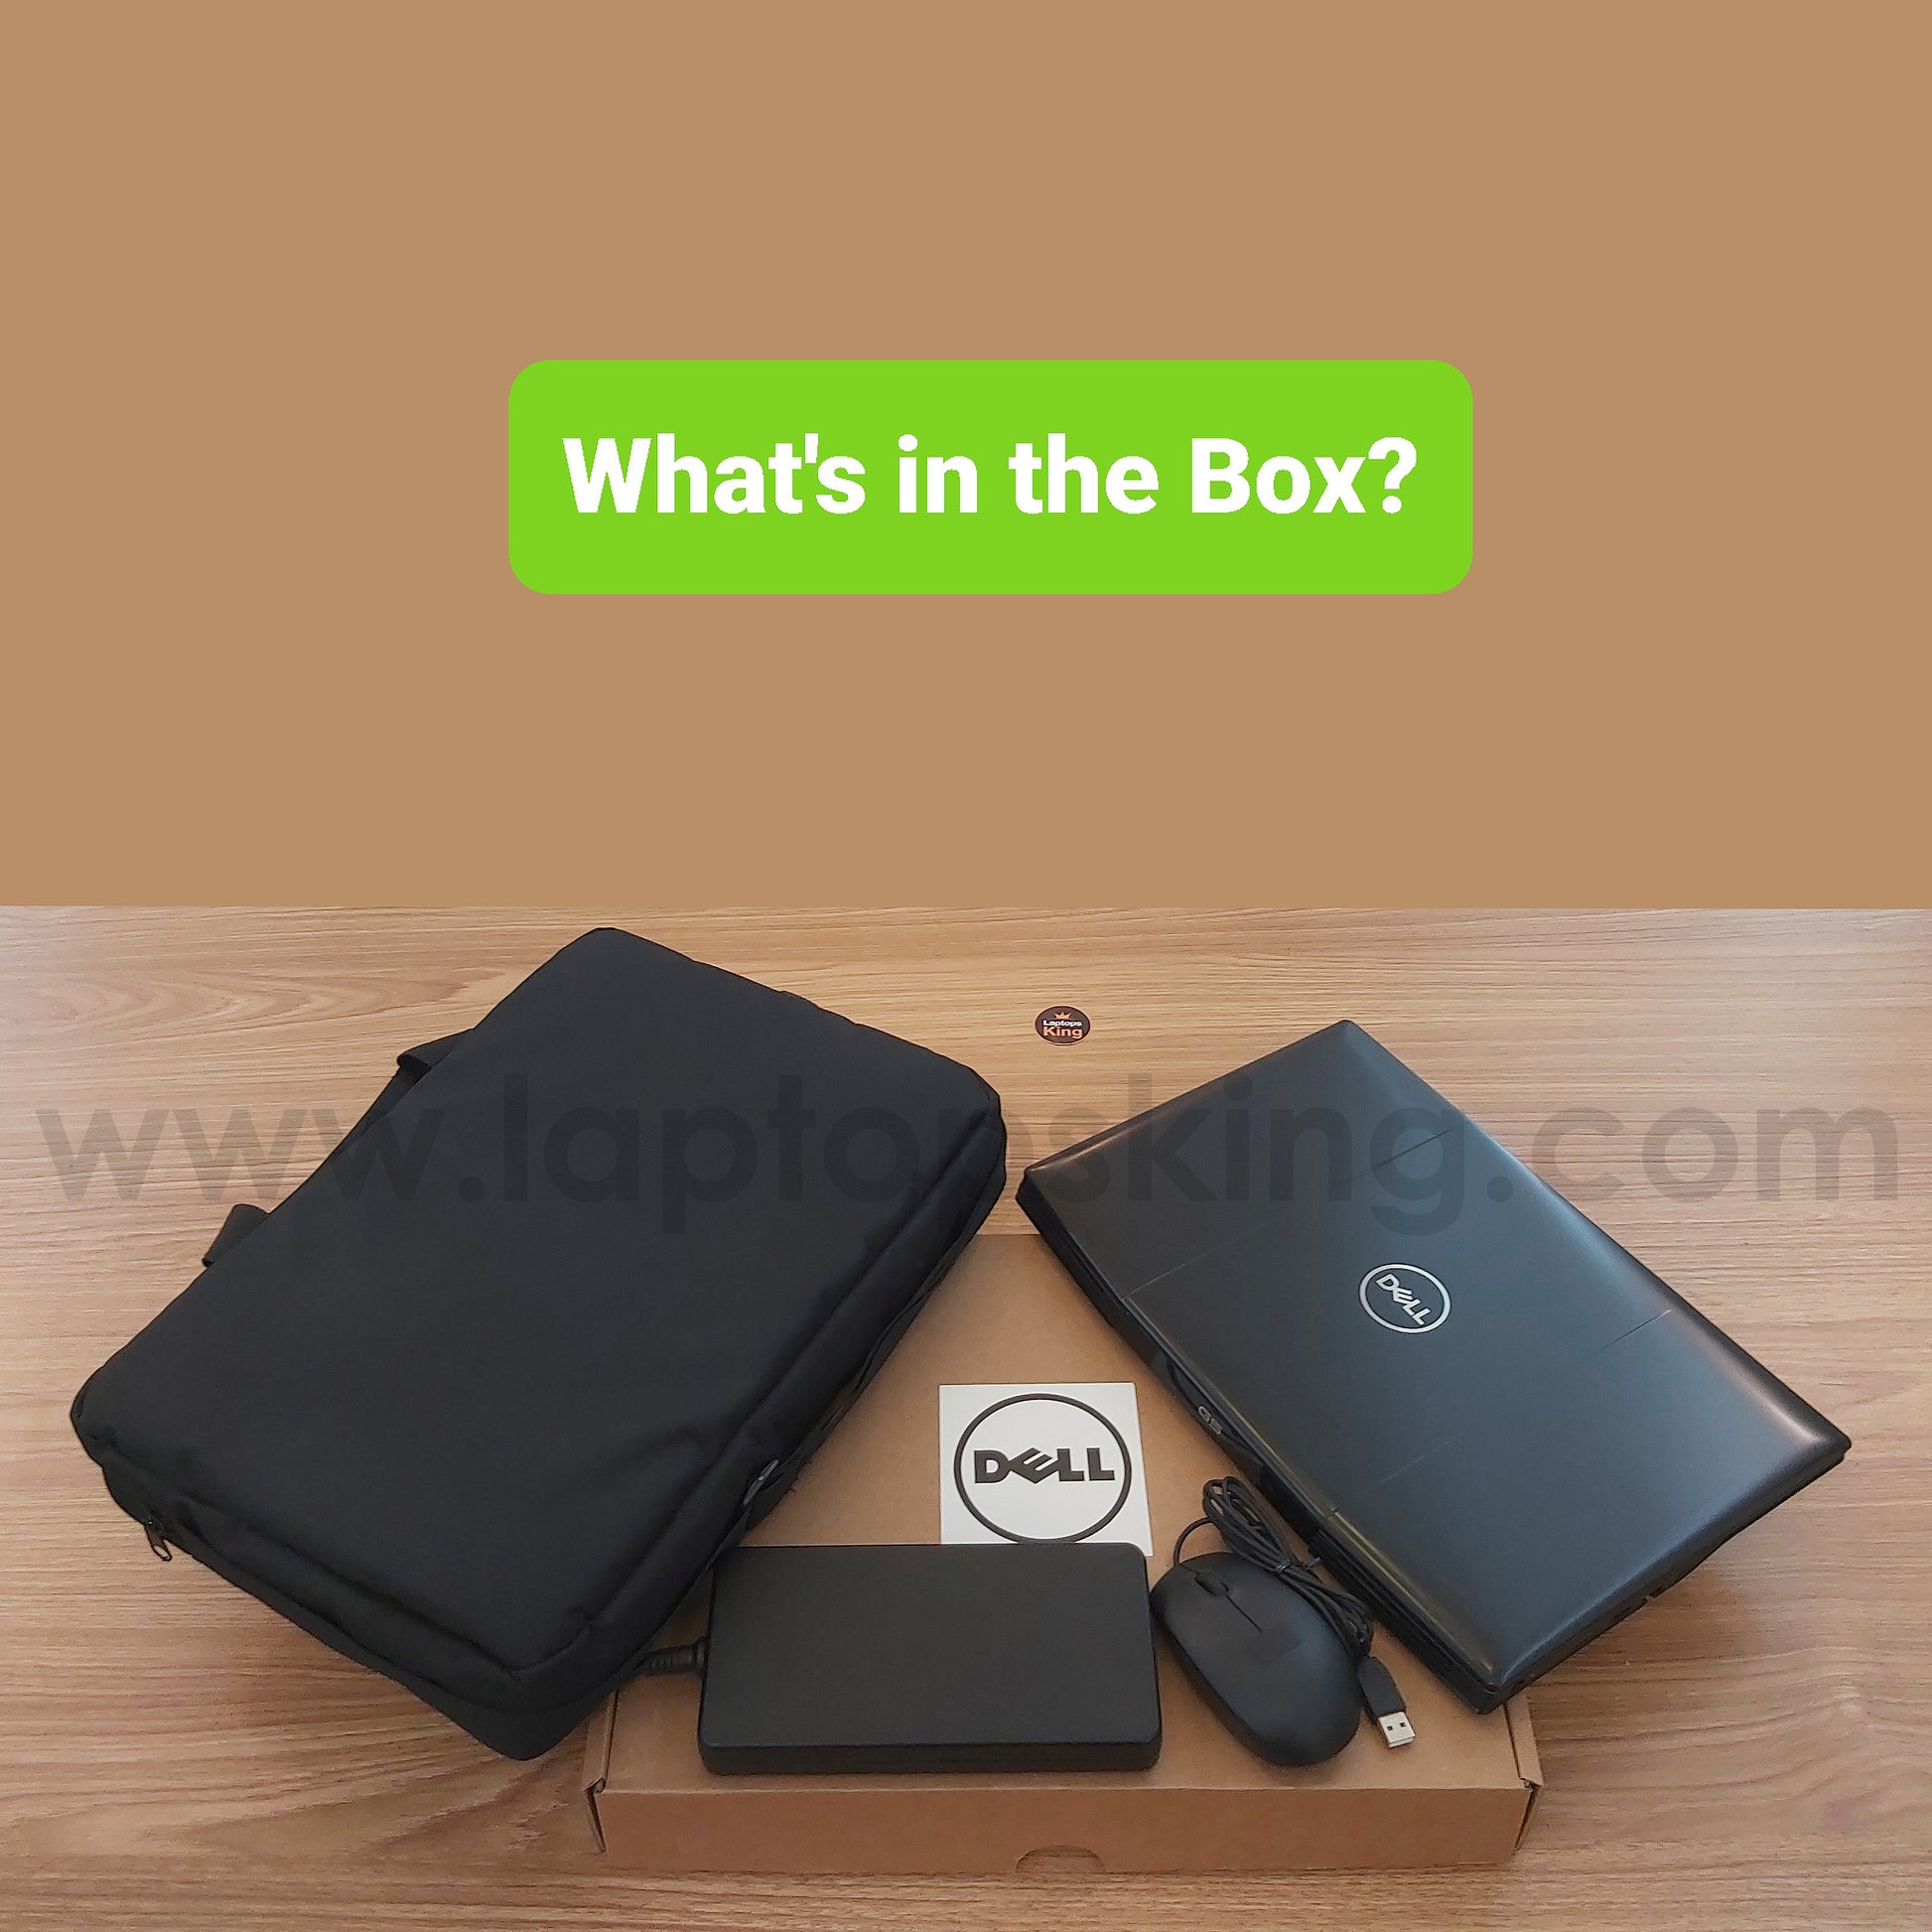 Dell G5 5500 i7-10750h Gtx 1650 Ti 120hz Gaming Laptop (New Open Box) Gaming laptop, Graphic Design laptop, best laptop for gaming, Best laptop for graphic design, computer for sale Lebanon, laptop for video editing in Lebanon, laptop for sale Lebanon, Best graphic design laptop,	Best video editing laptop, Best programming laptop, laptop for sale in Lebanon, laptops for sale in Lebanon, laptop for sale in Lebanon, buy computer Lebanon, buy laptop Lebanon.